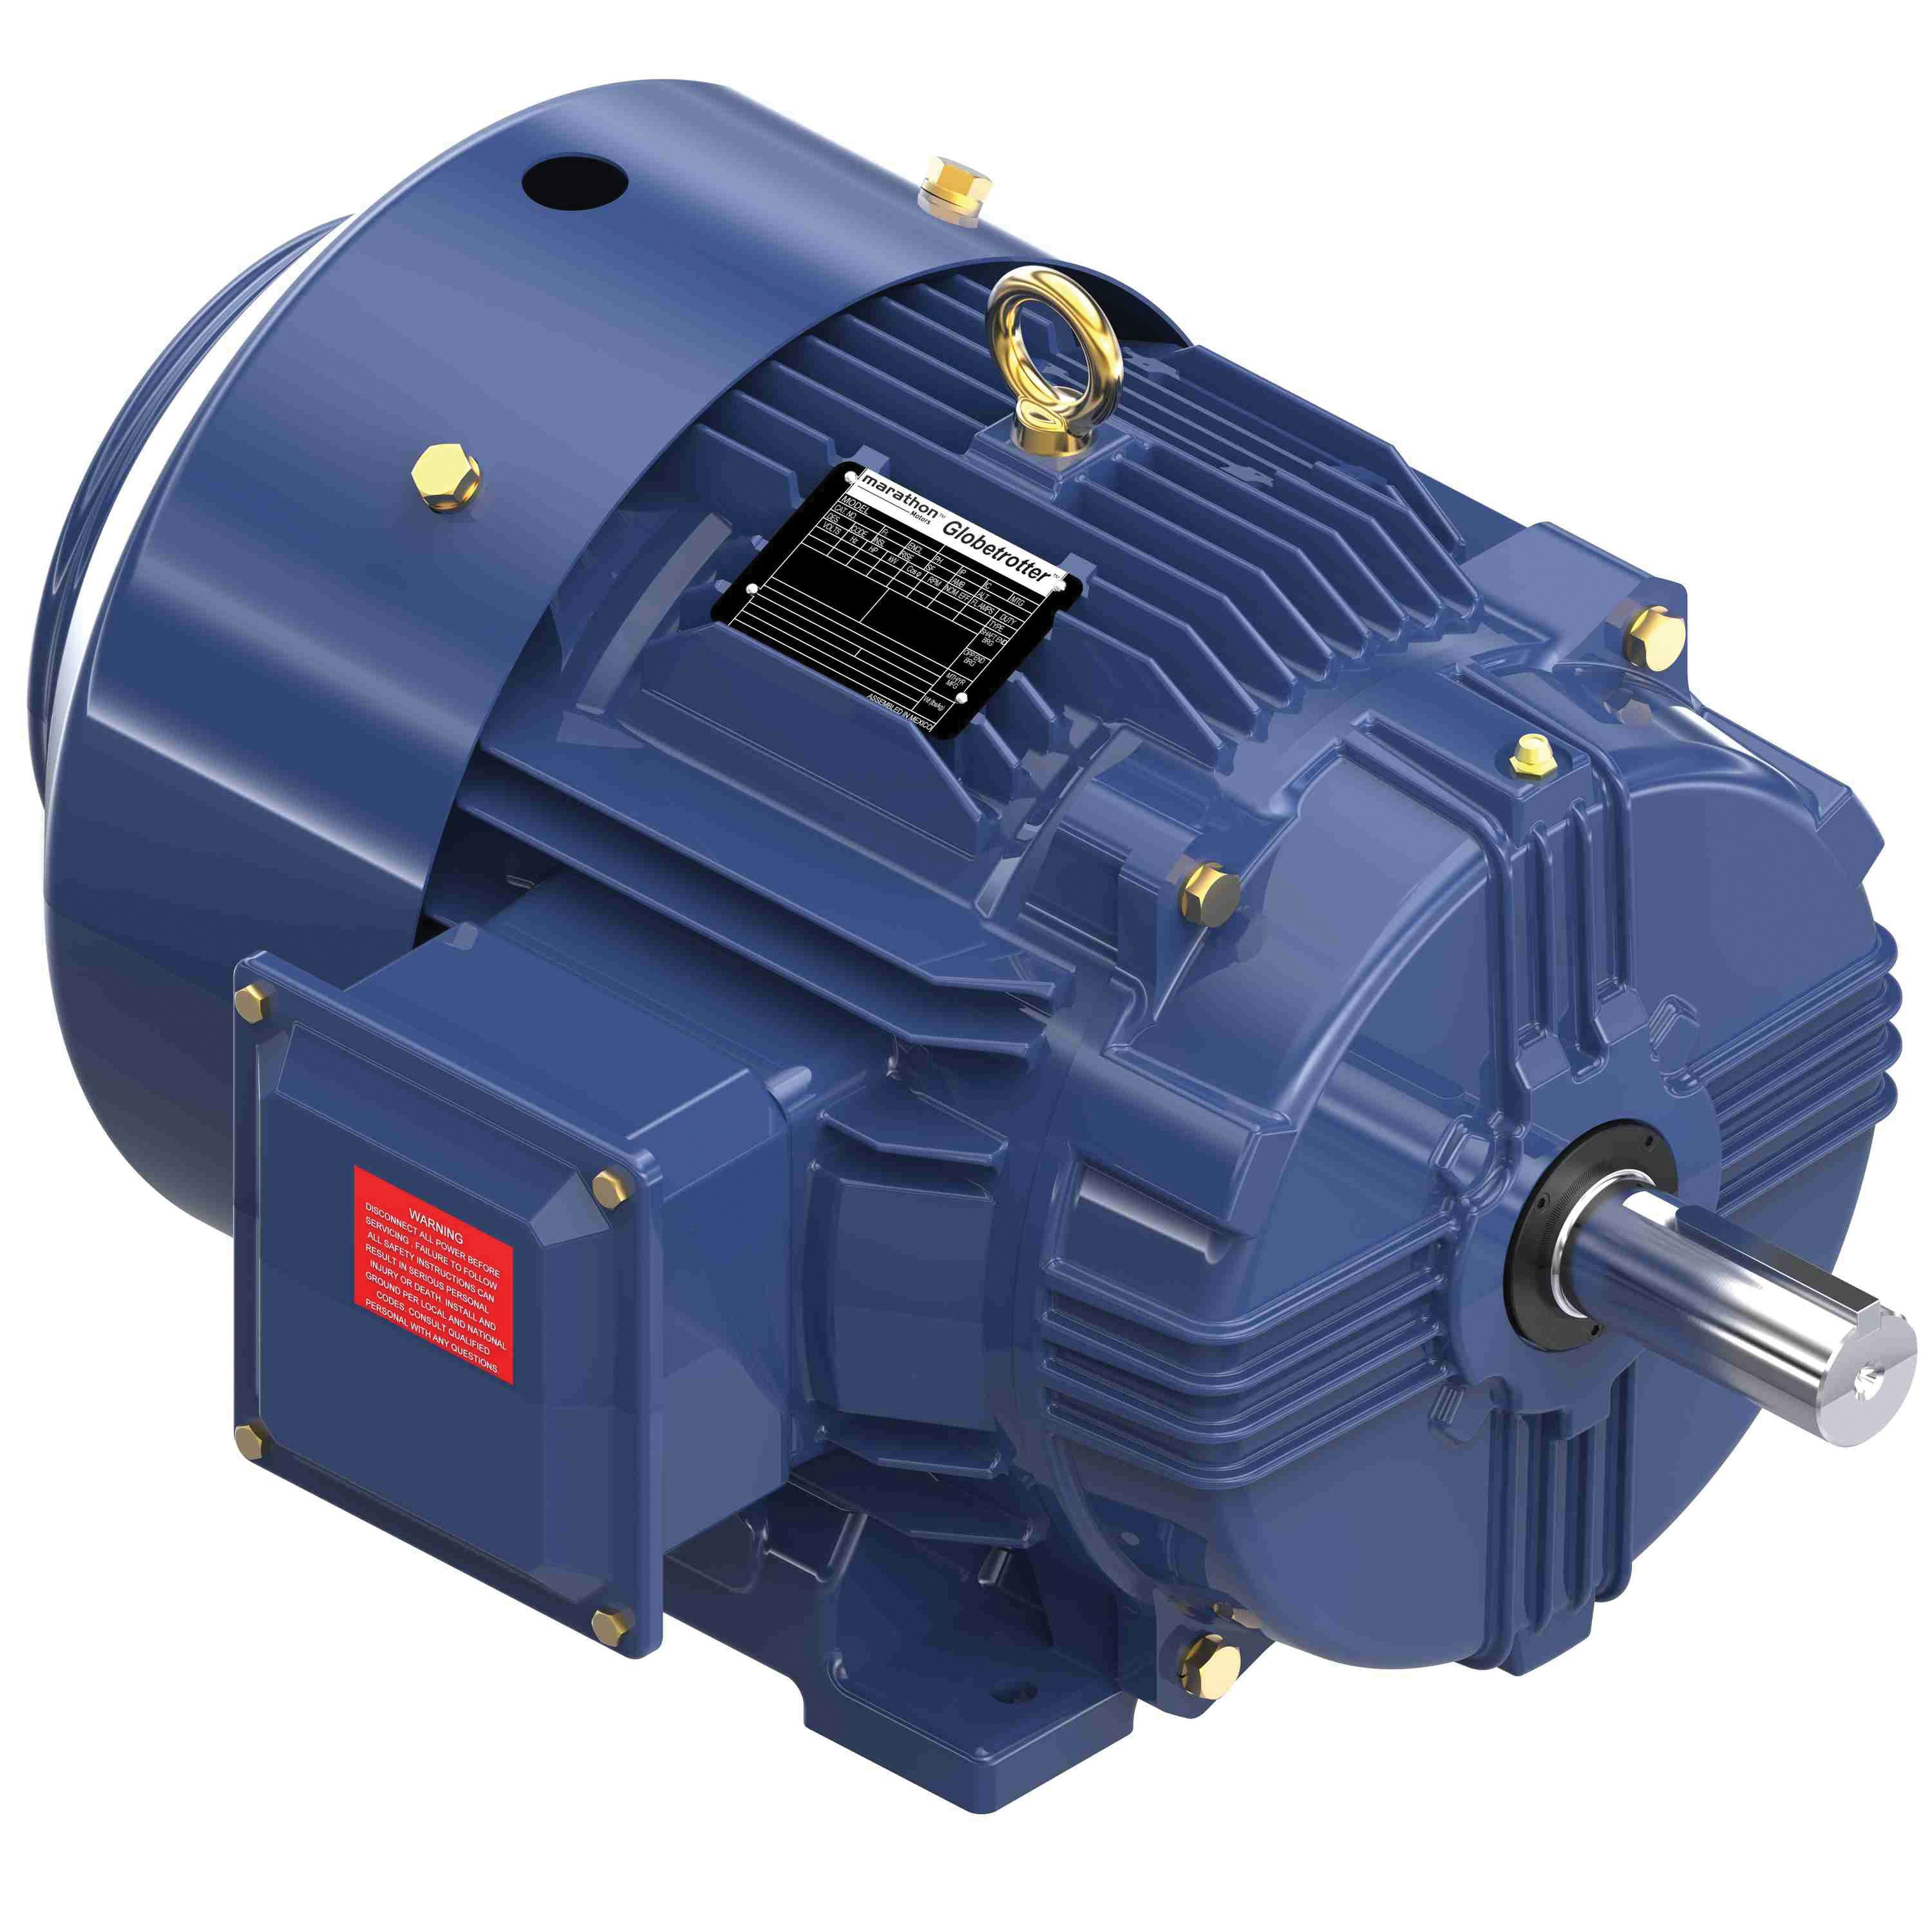 Marathon® Globetrotter® GT1025A General Purpose Motor, 208 to 230/460 V, 24.2/48.5 to 53 A, 14.9 kW, 20 hp, 60 Hz